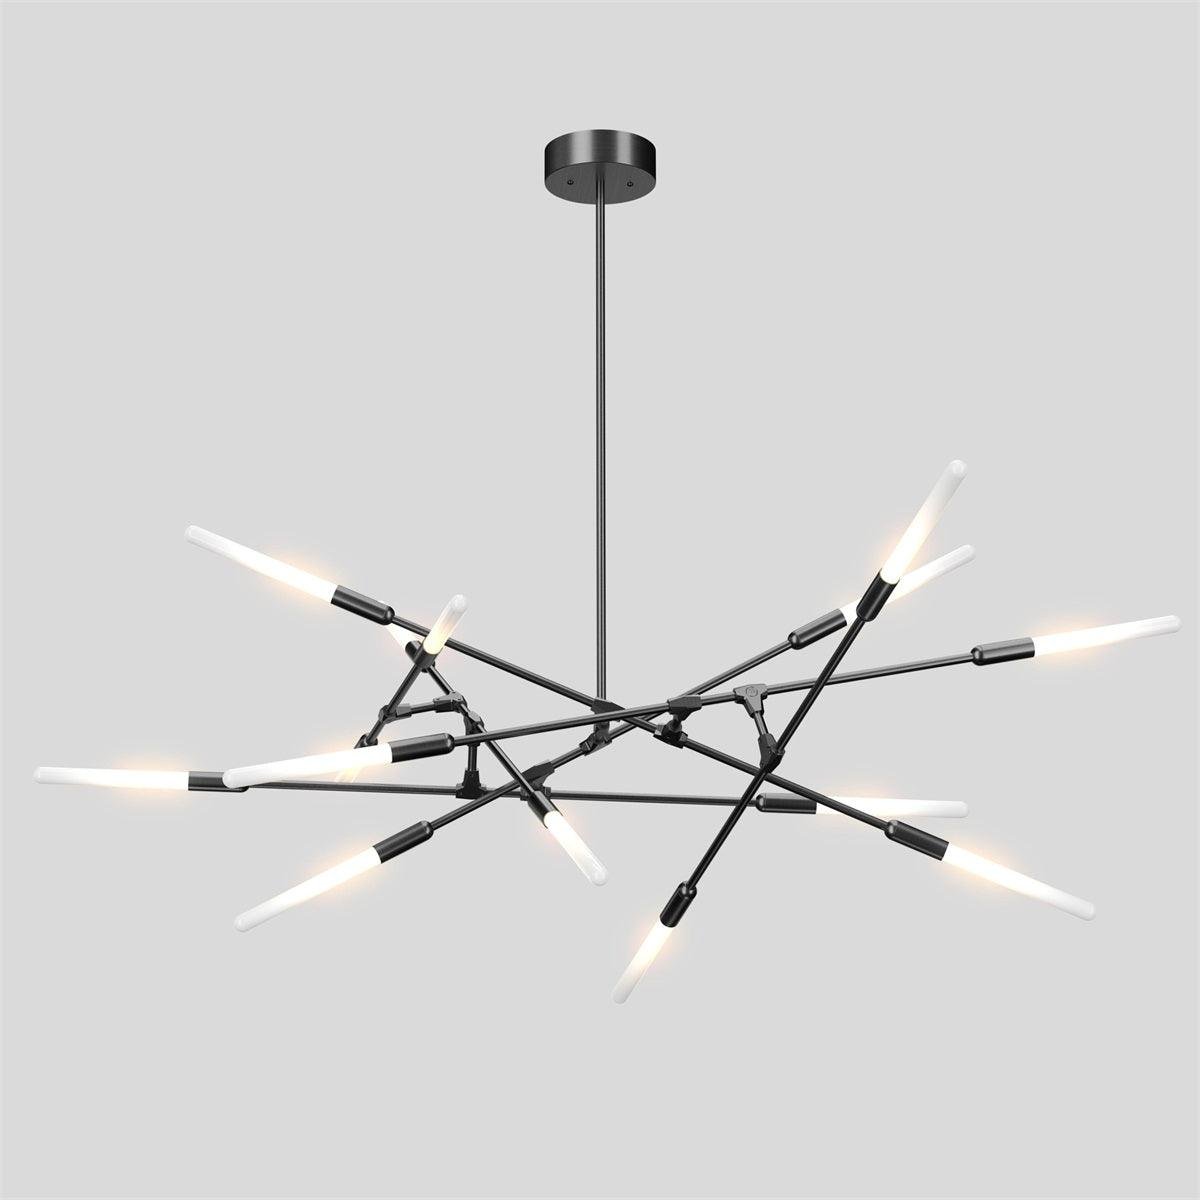 Black Dawn Chandeliers with 14 Horizontal Heads, measuring ∅ 63″ x H 27.6″